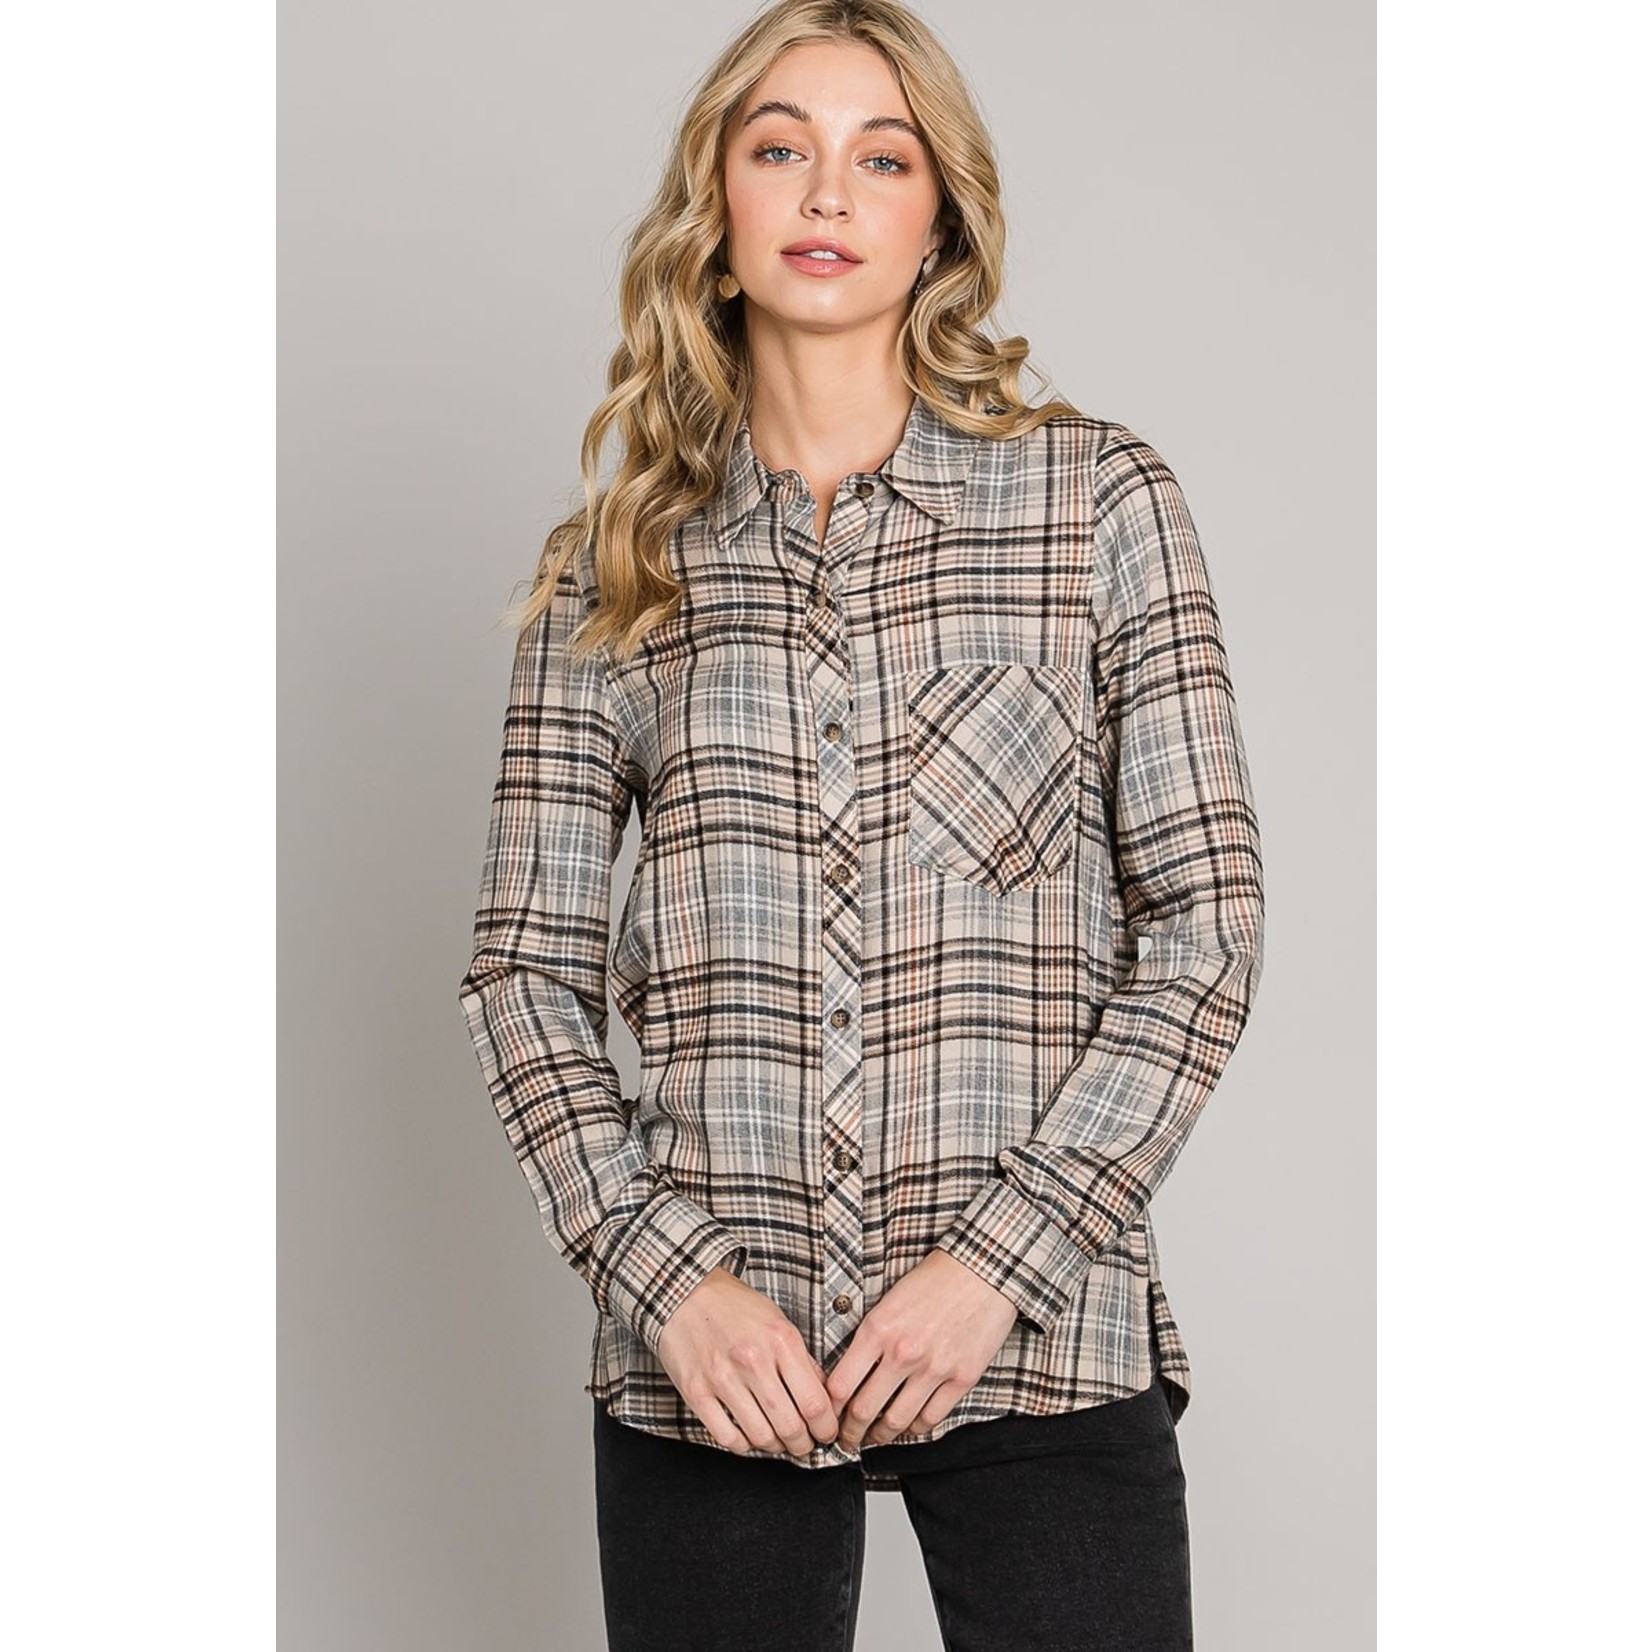 The Ada Flannel